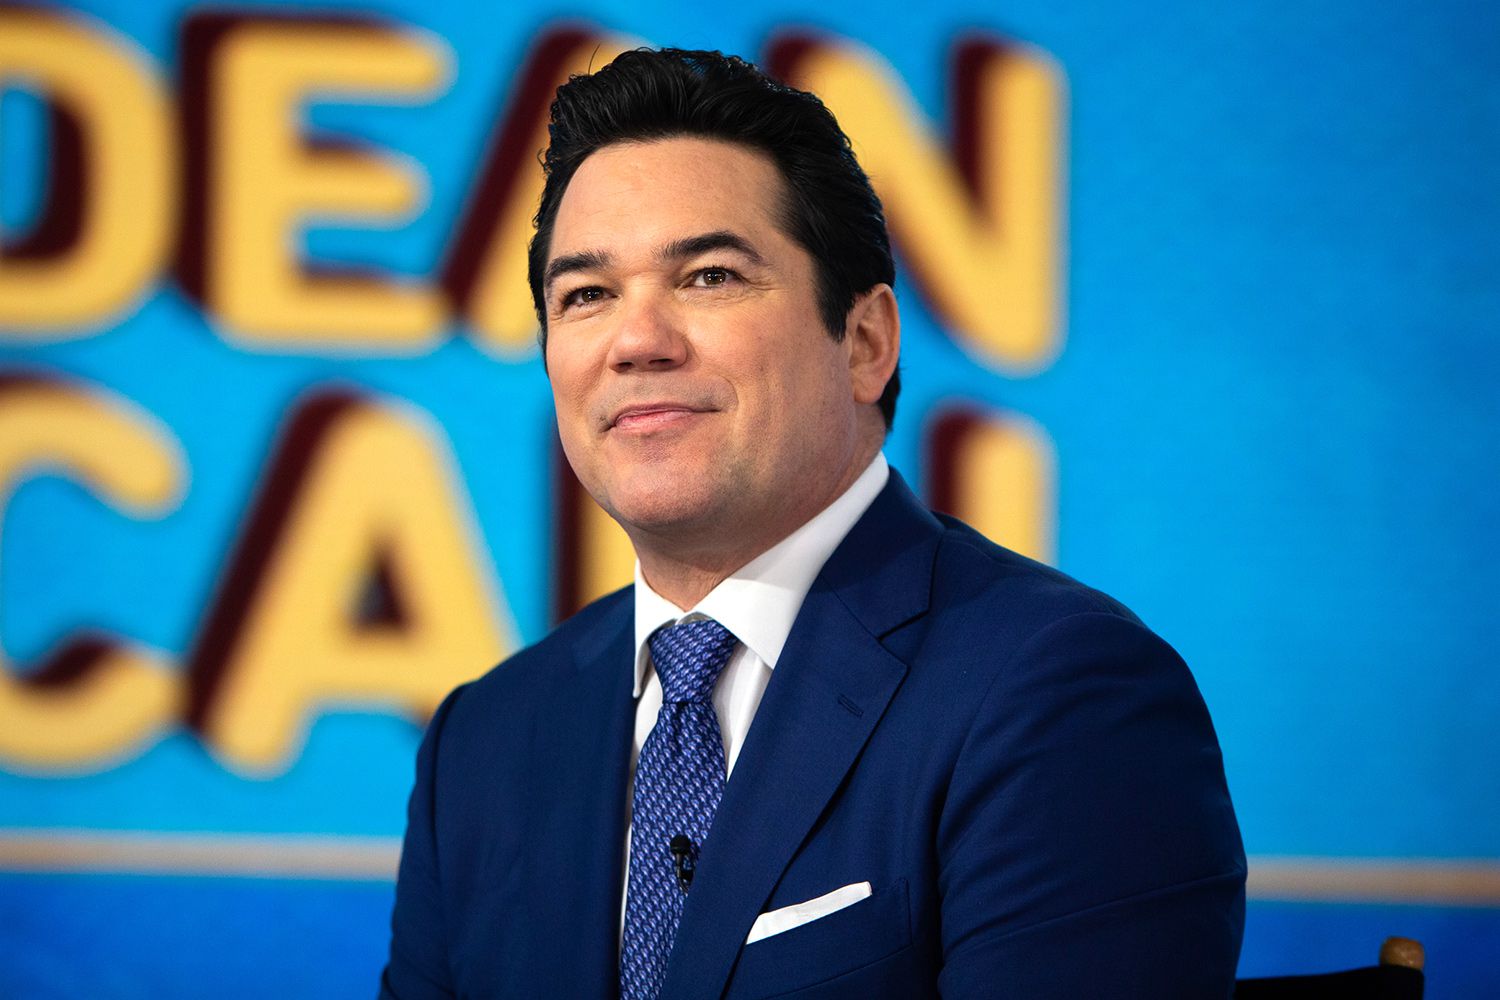 Dean Cain Addresses Bisexual Superman Storyline in Comic Books: 'They're Jumping on the Bandwagon'